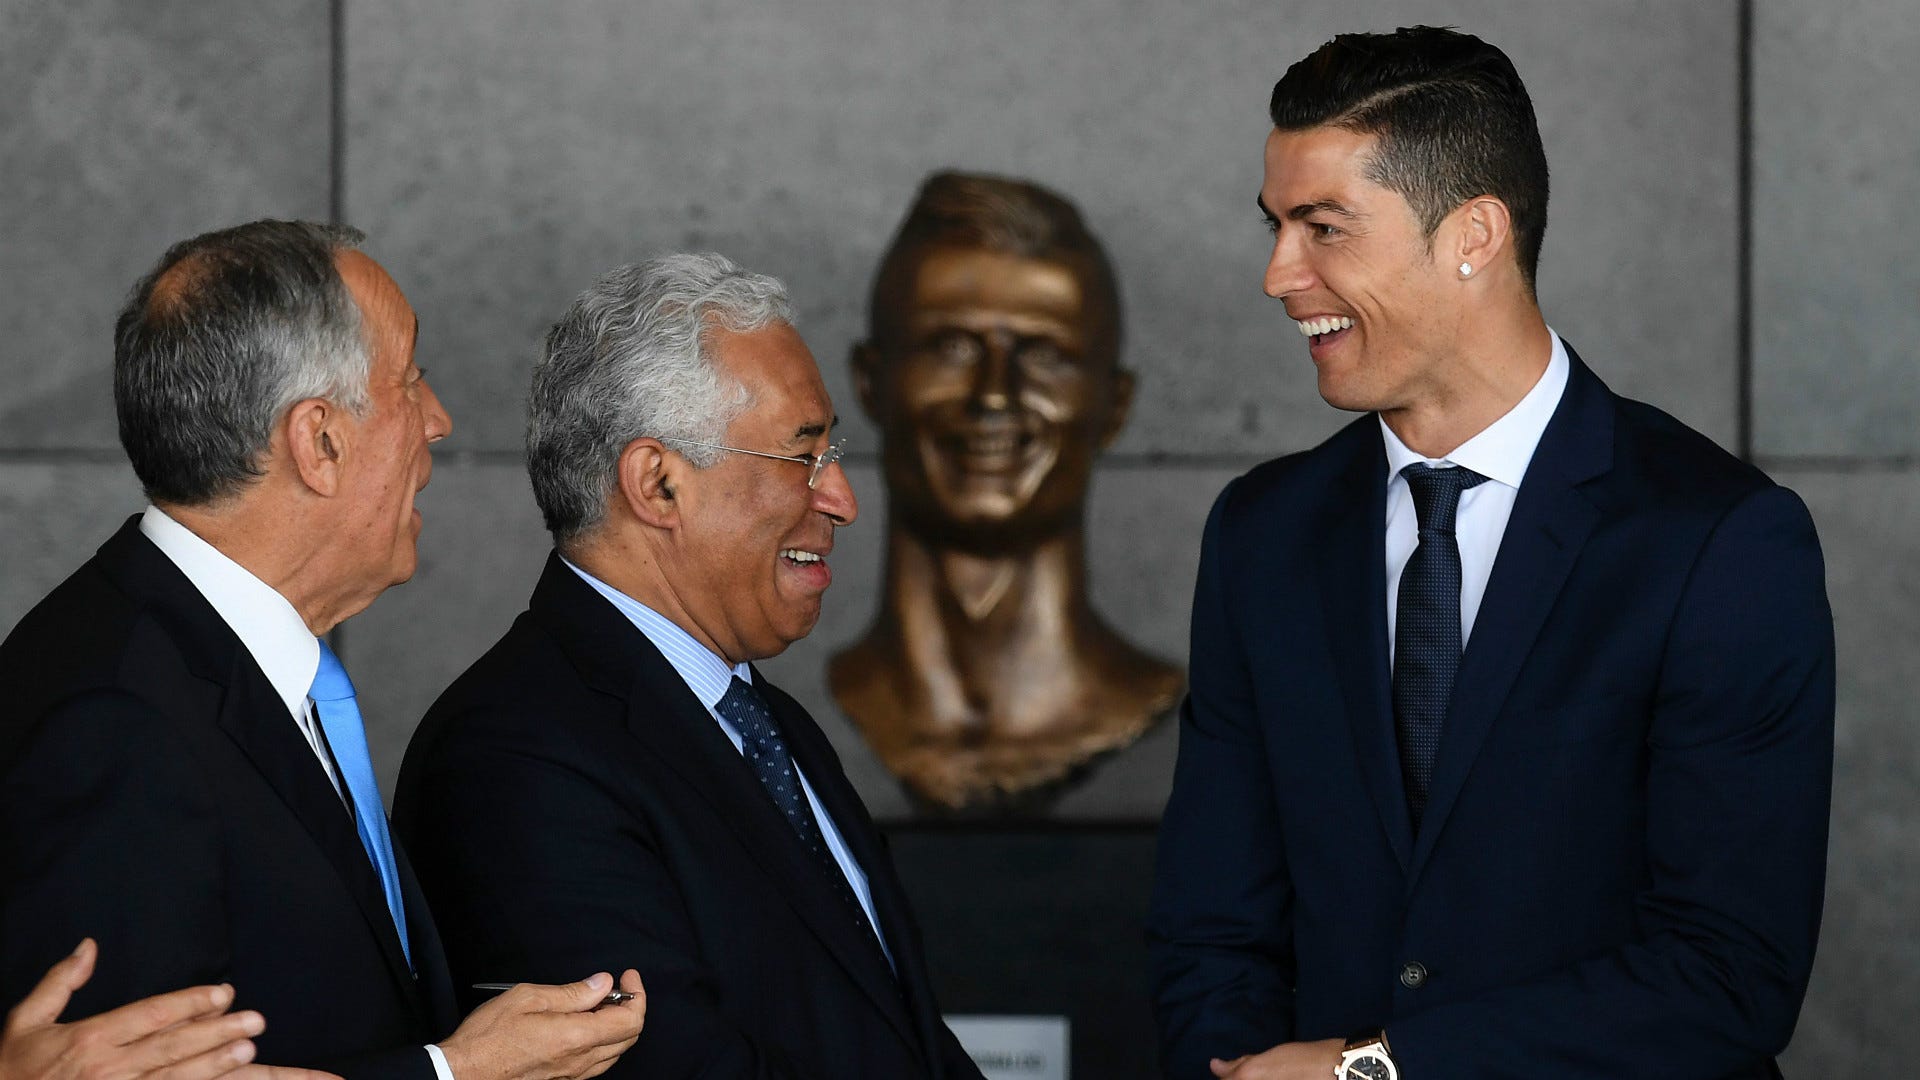 Cristiano Ronaldo Statue Who Sculpted It Where Is It And All You Need To Know About The Bizarre